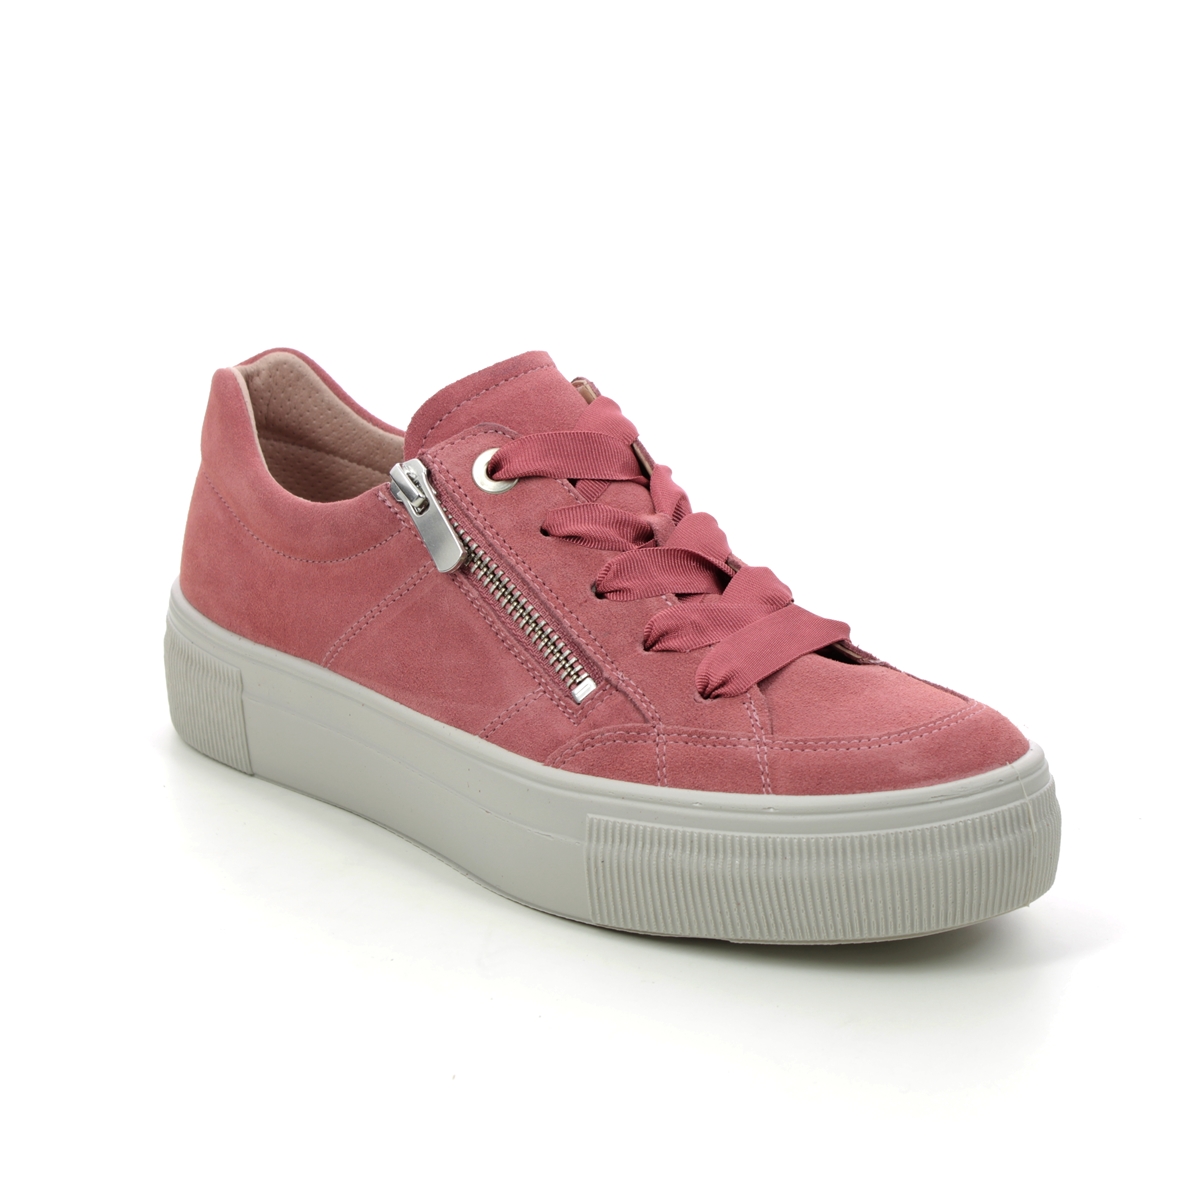 Legero Lima Zip Rose Pink Womens Trainers 2000911-5620 In Size 39 In Plain Rose Pink